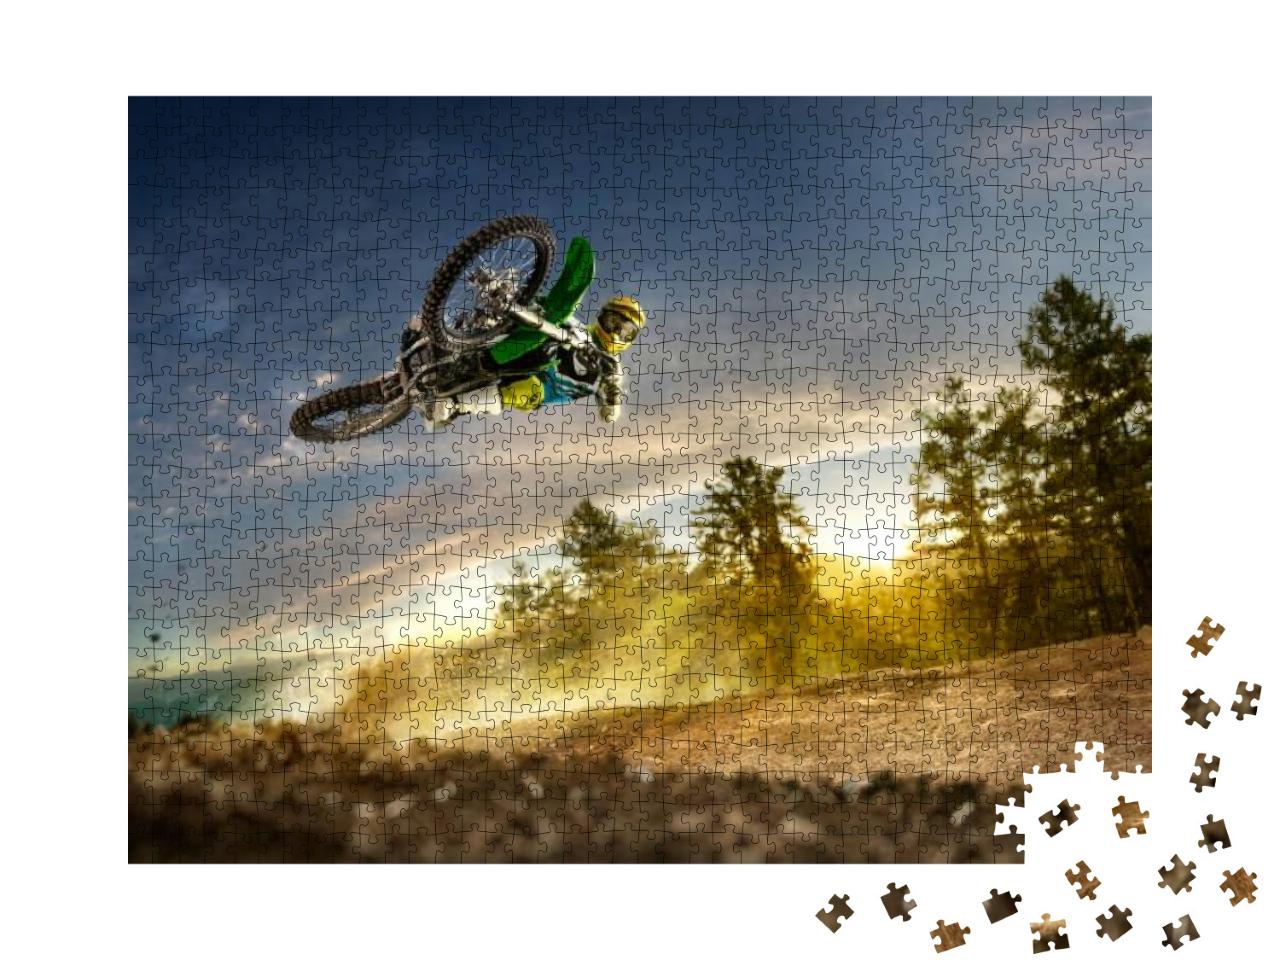 Dirt Bike Rider is Flying High in Evening... Jigsaw Puzzle with 1000 pieces